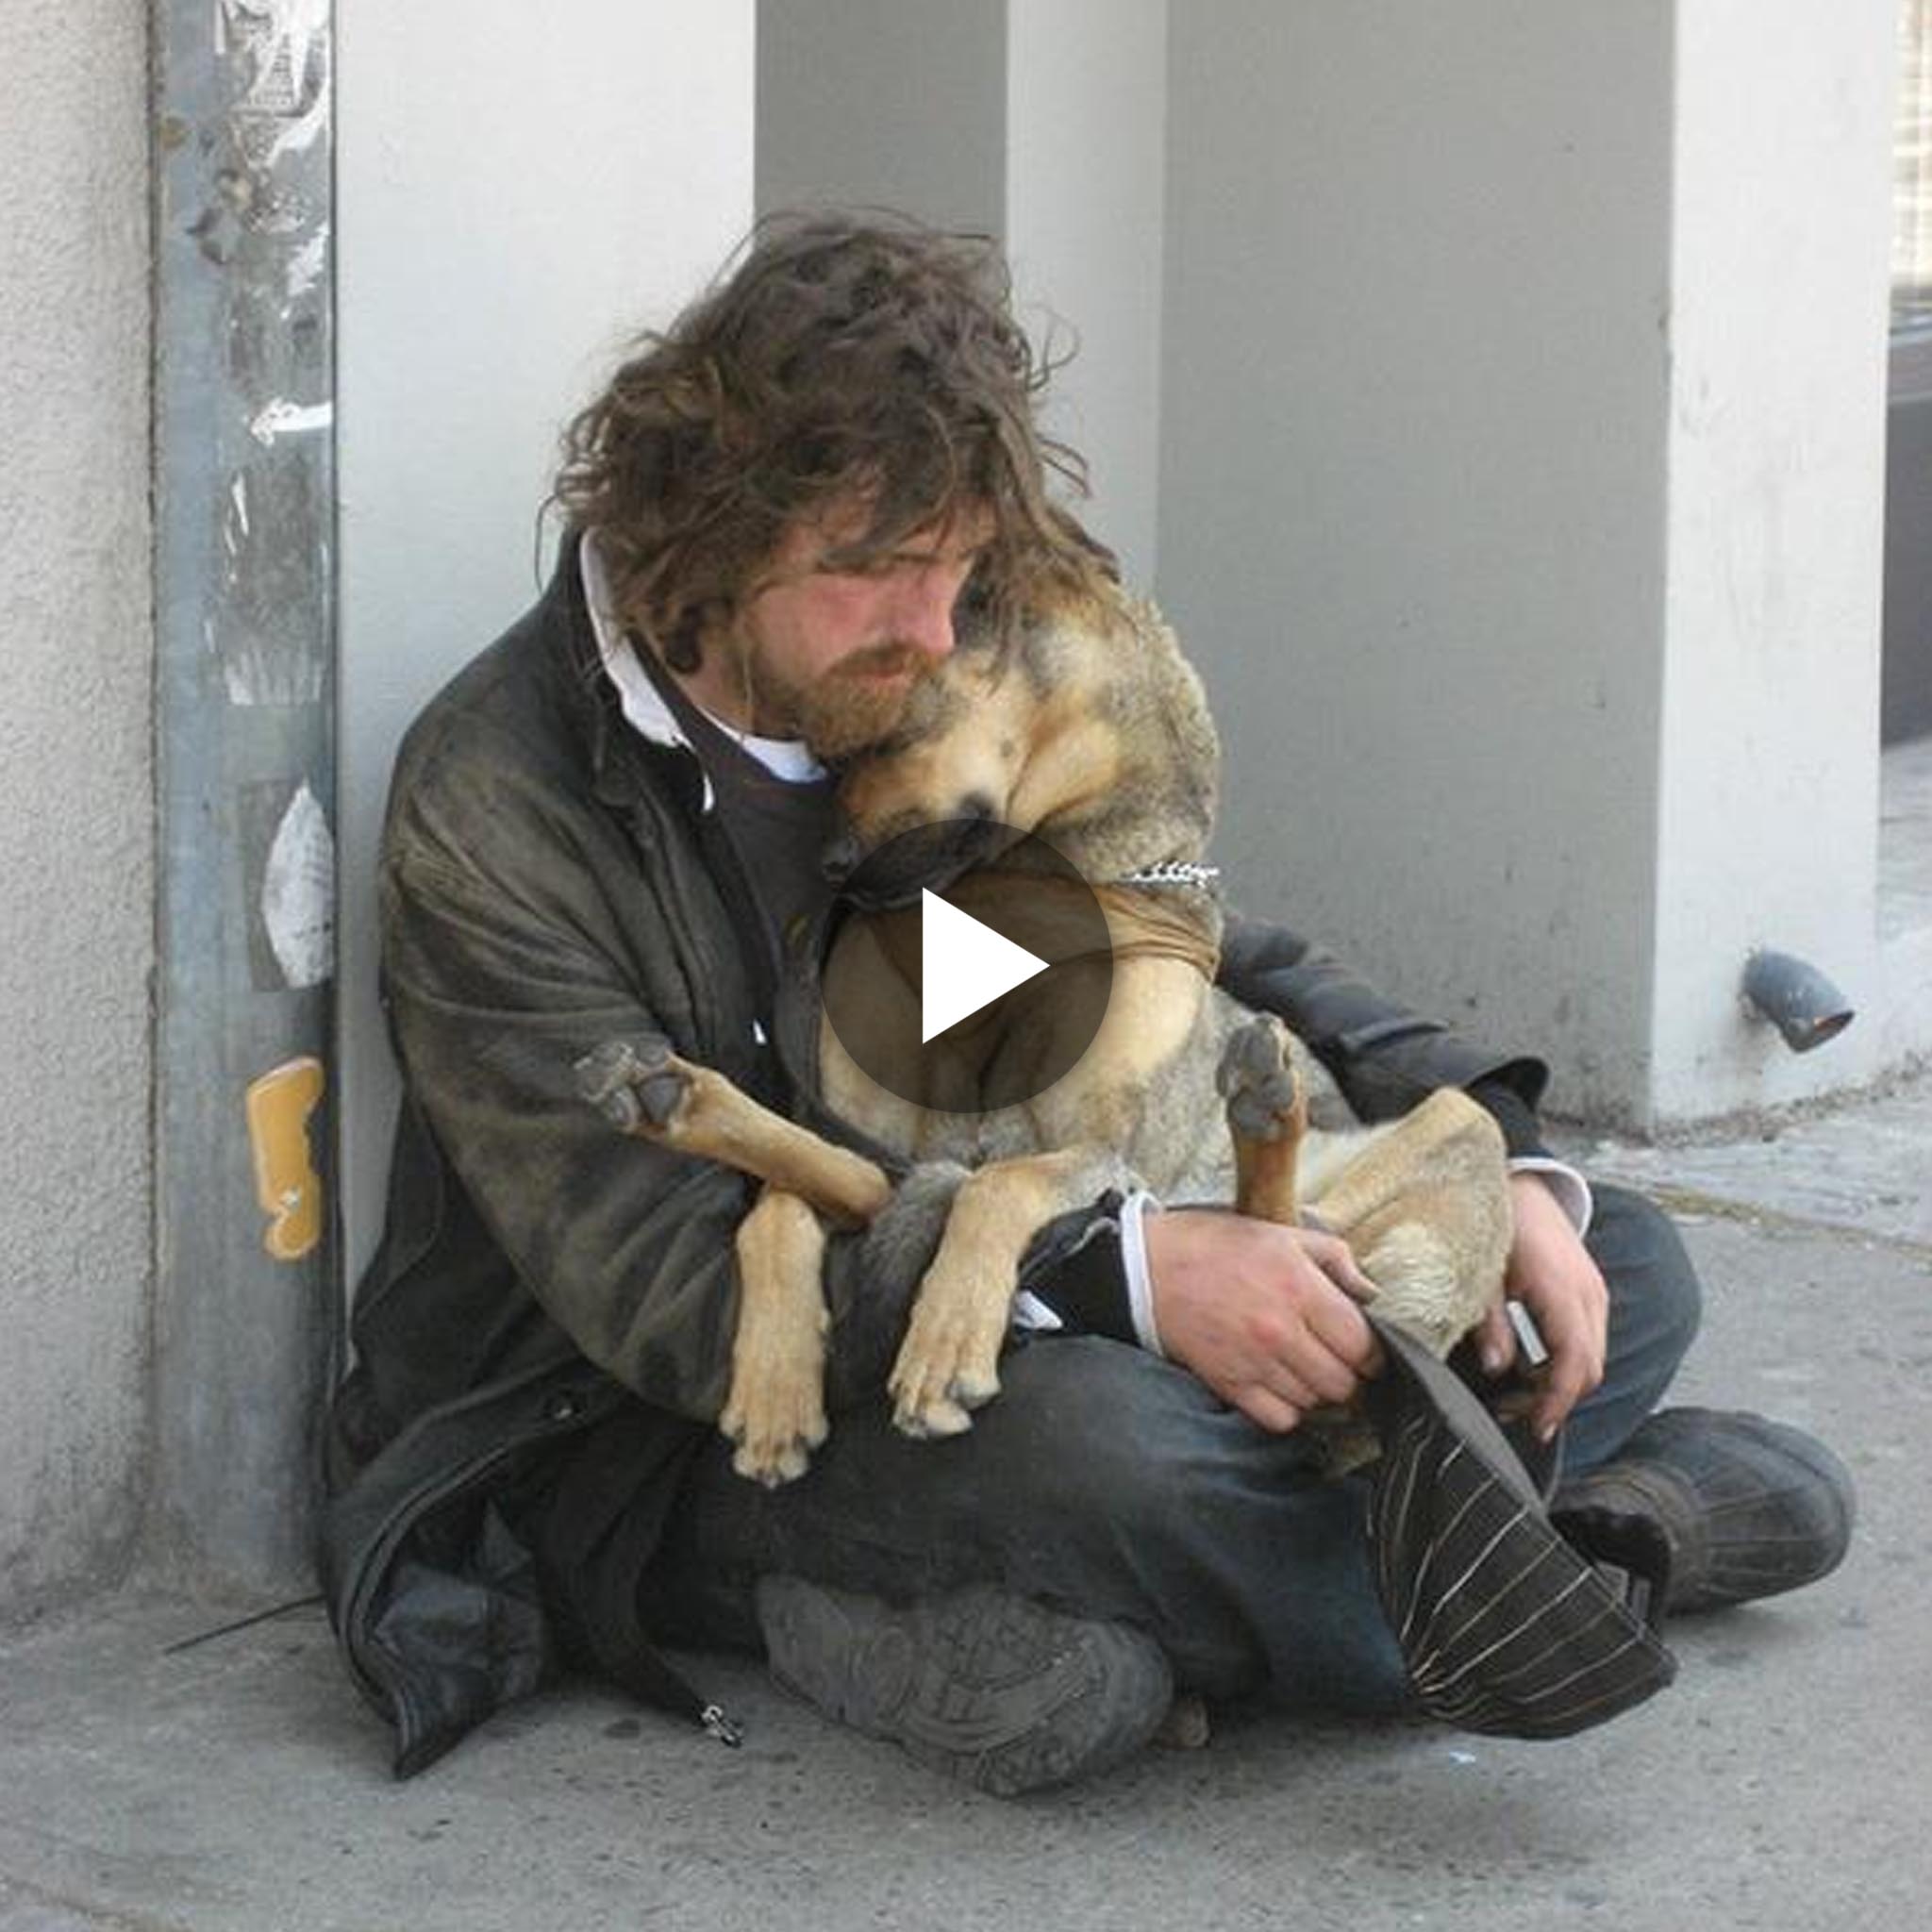 For Him, His Dog Is Family, and Together They Triumph Over Life’s Challenges